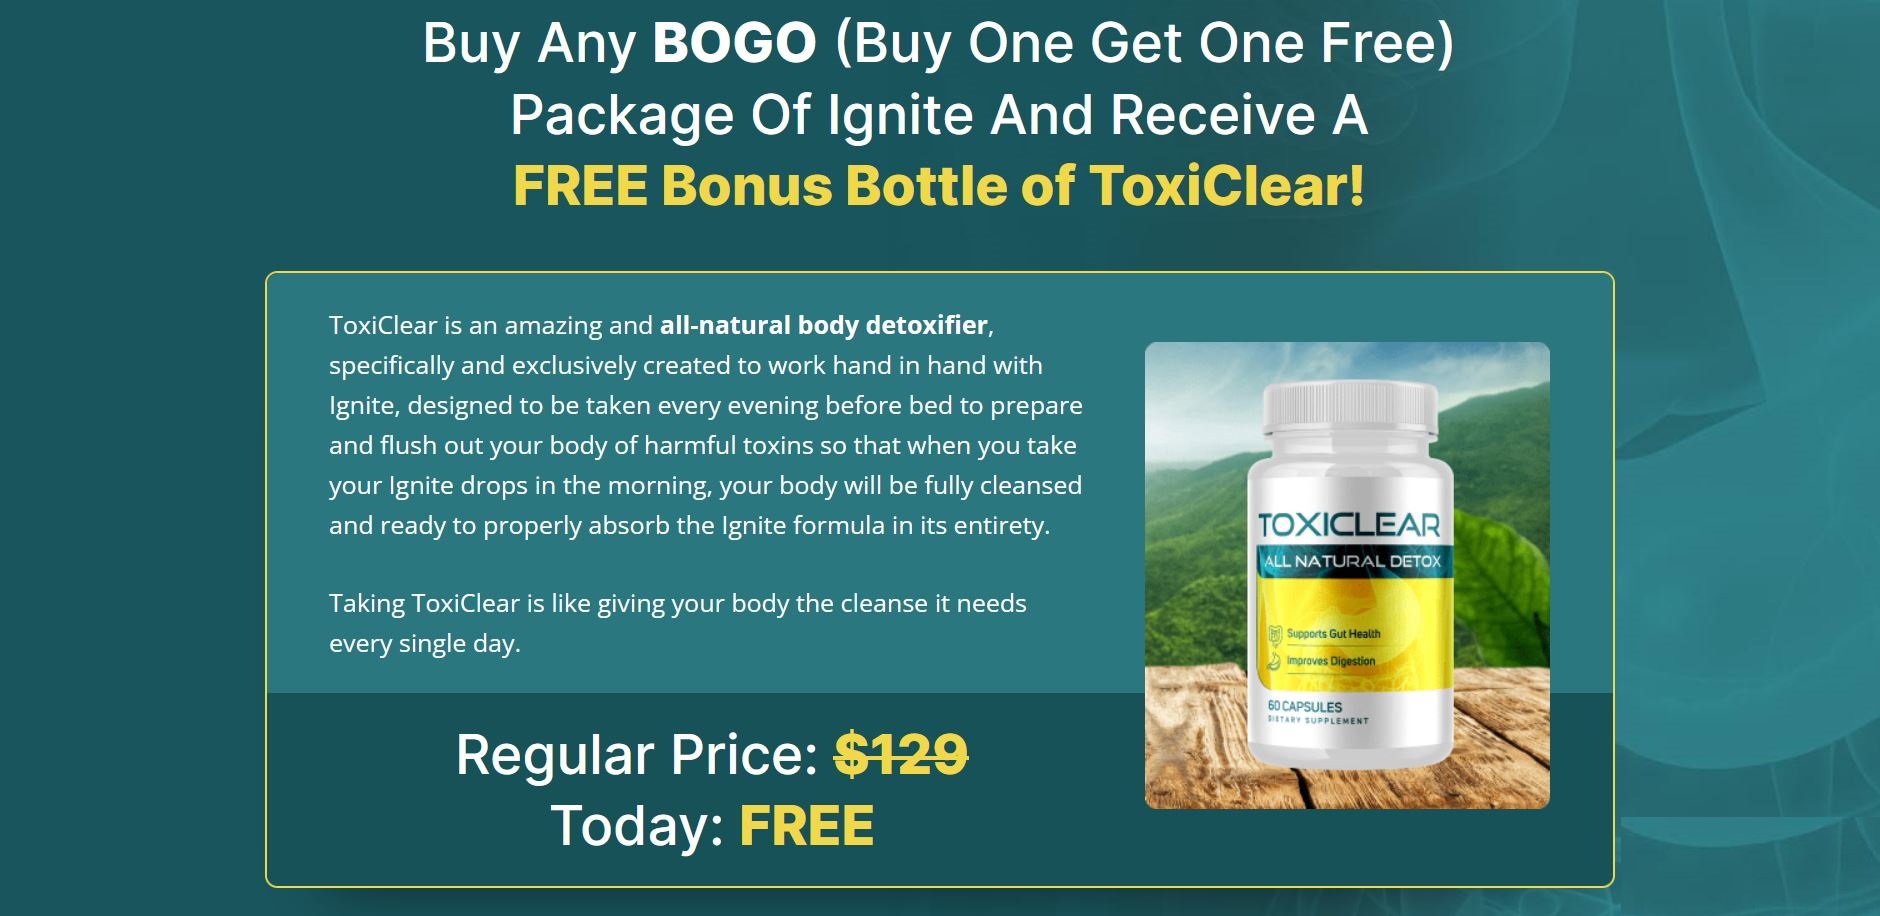 Toxiclear Buy One Get One Free